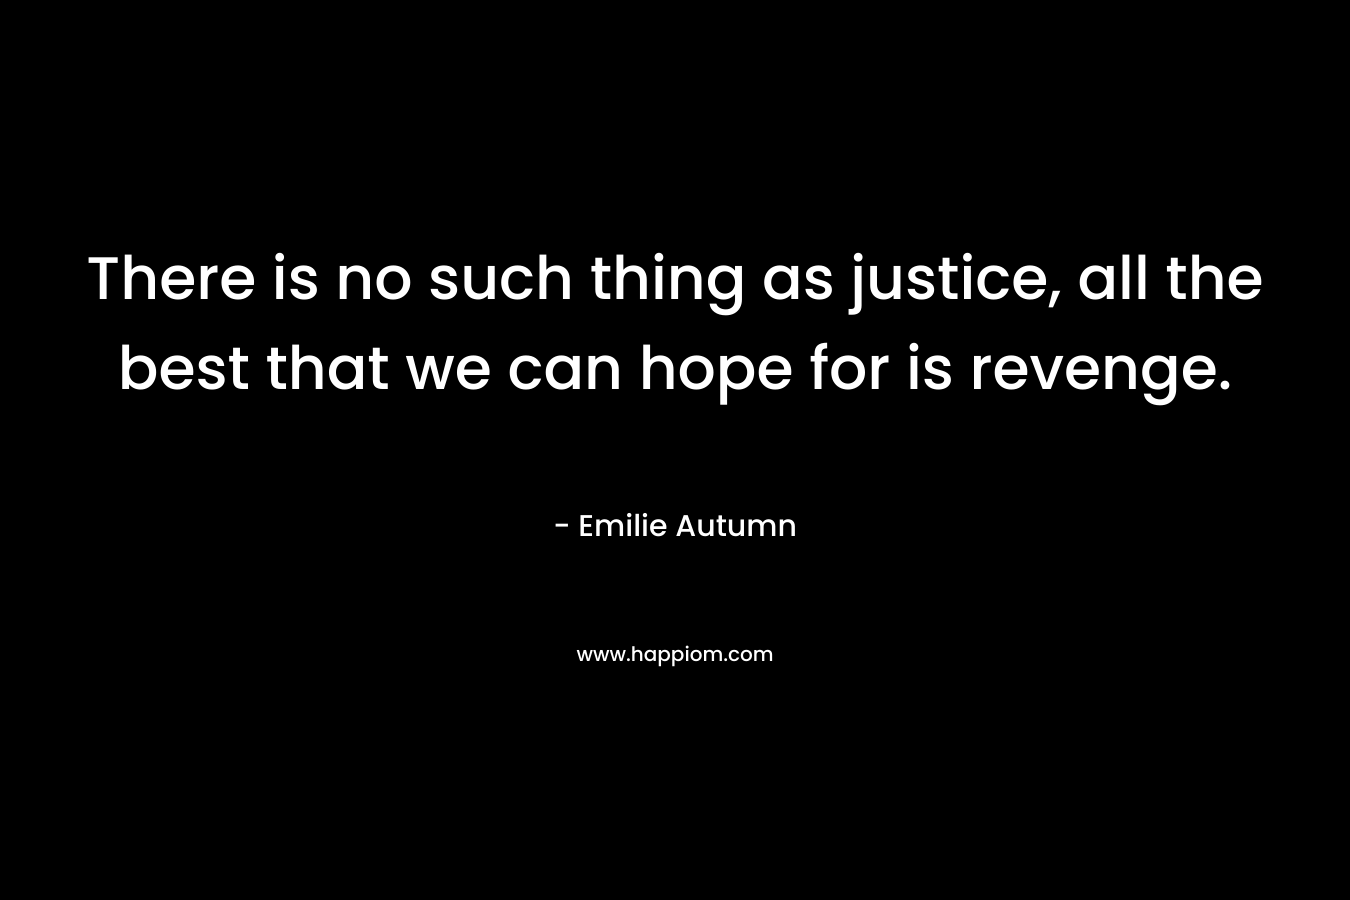 There is no such thing as justice, all the best that we can hope for is revenge.